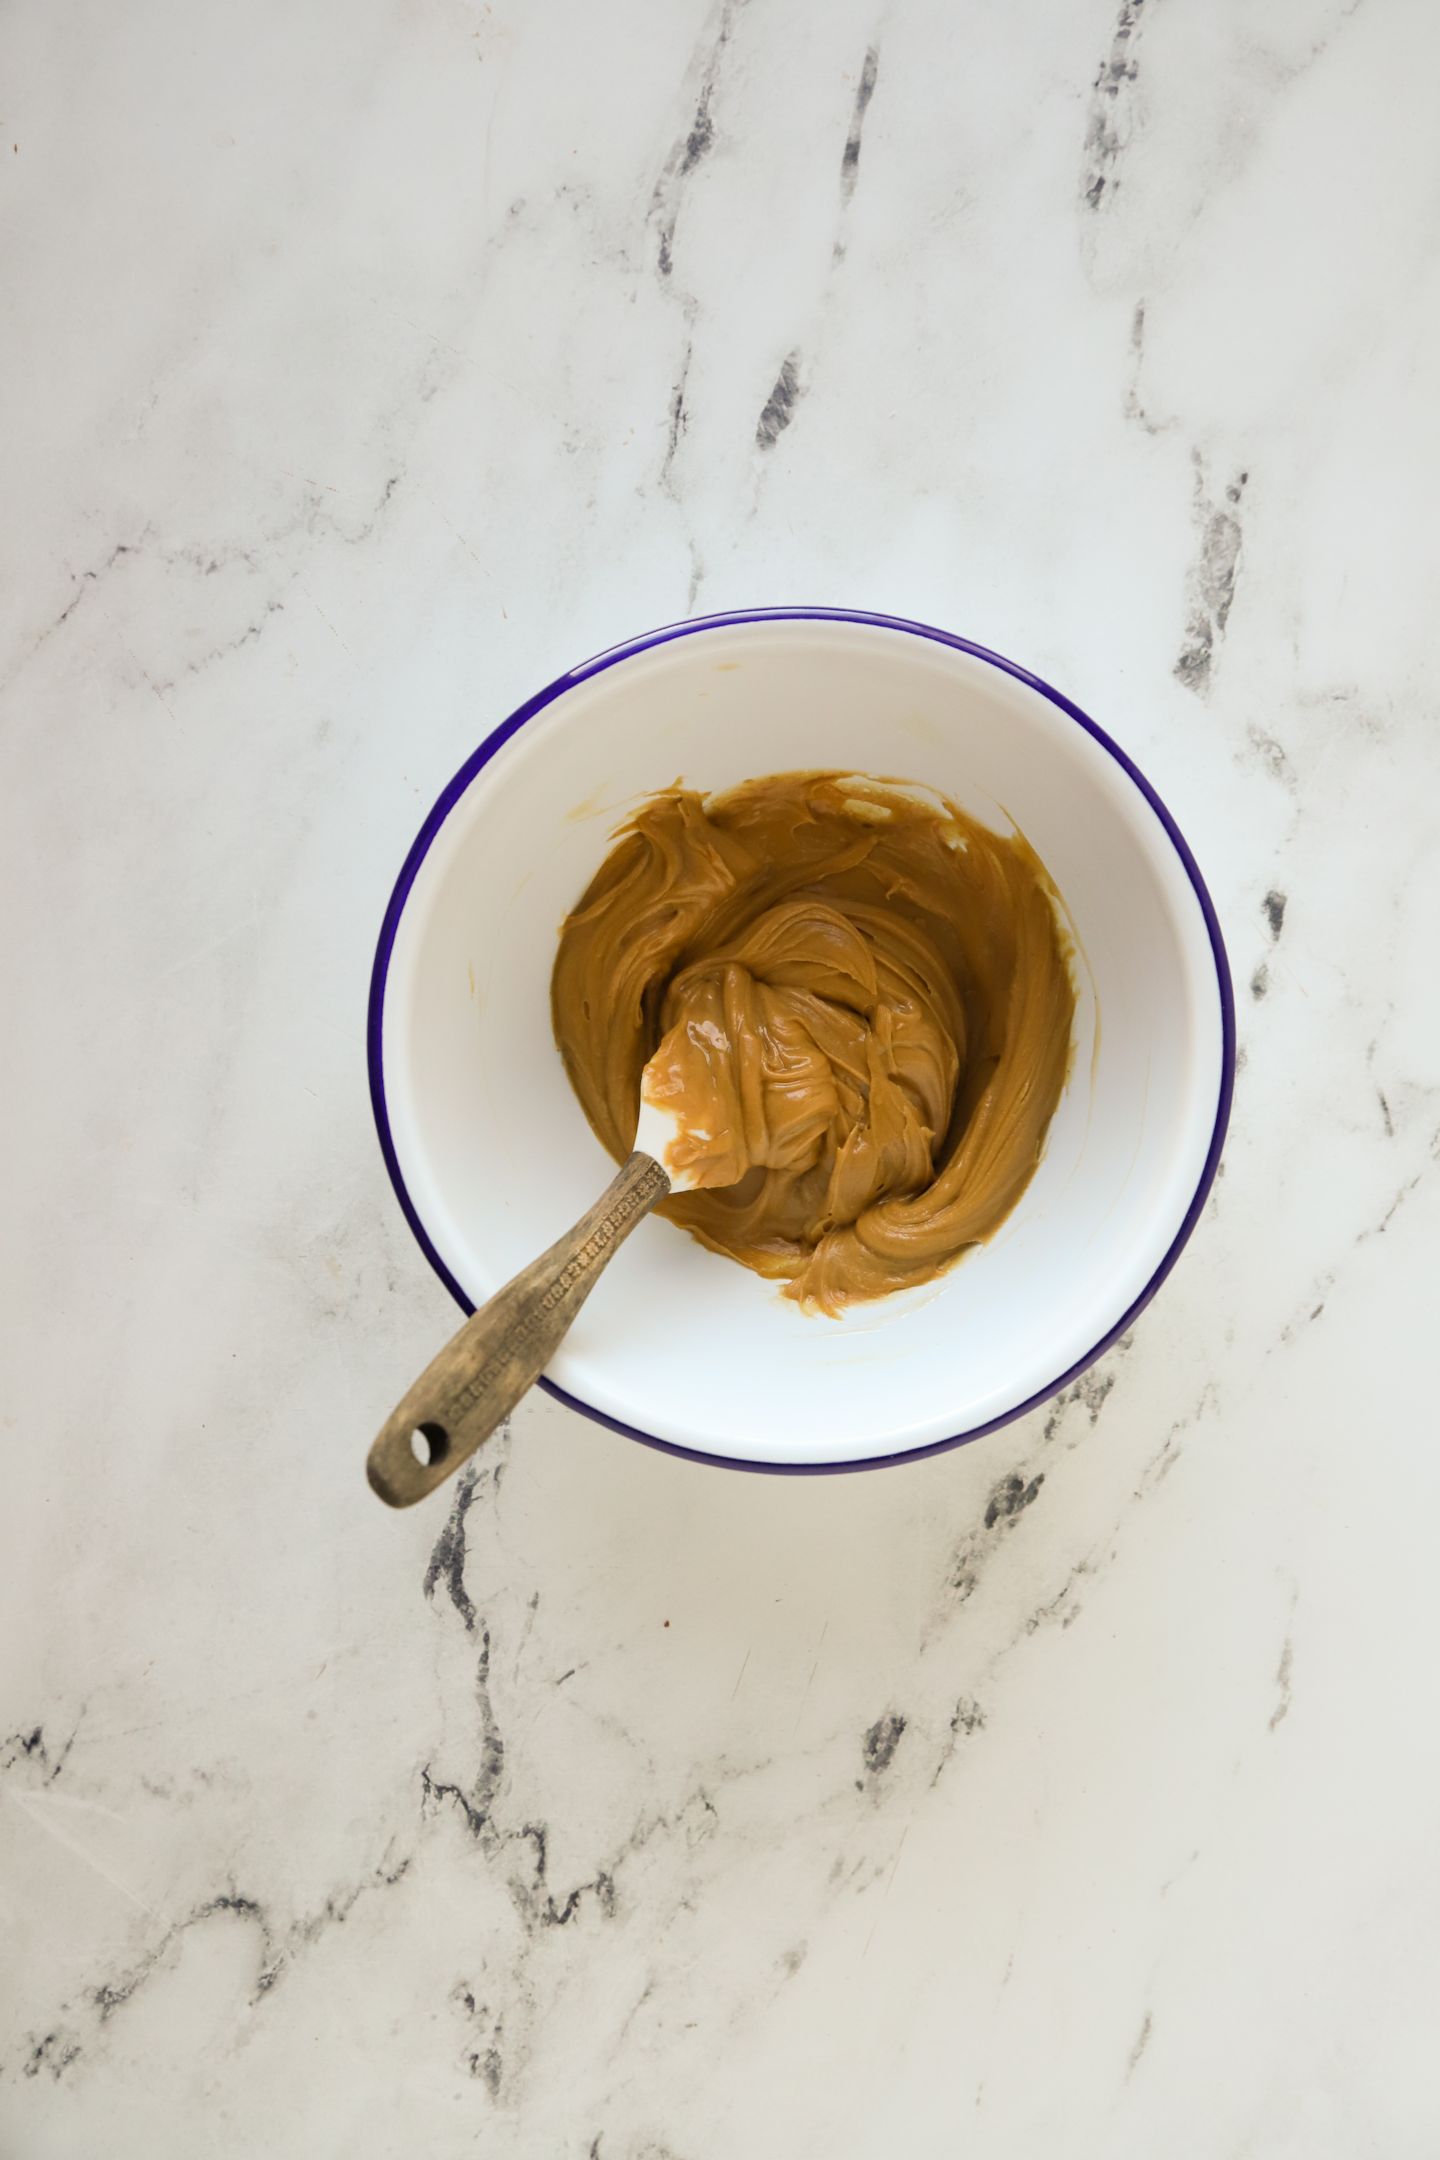 creamy peanut butter filling in a bowl with a rubber spatula